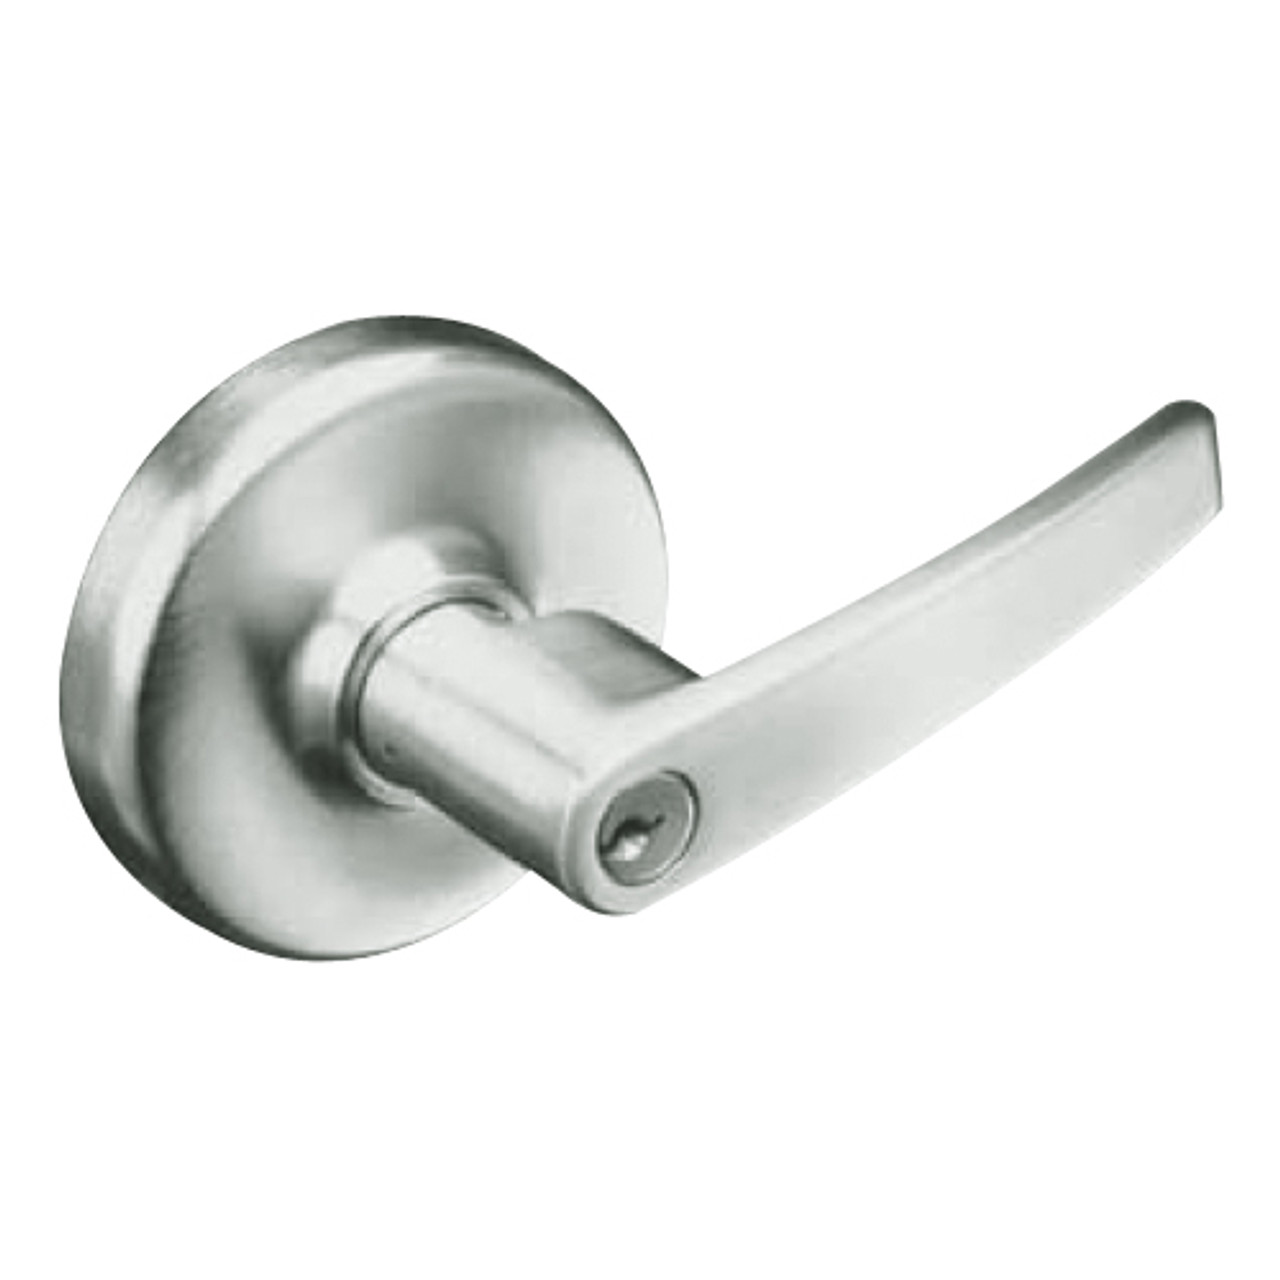 CL3155-AZD-618 Corbin CL3100 Series Vandal Resistant Classroom Cylindrical Locksets with Armstrong Lever in Bright Nickel Plated Finish